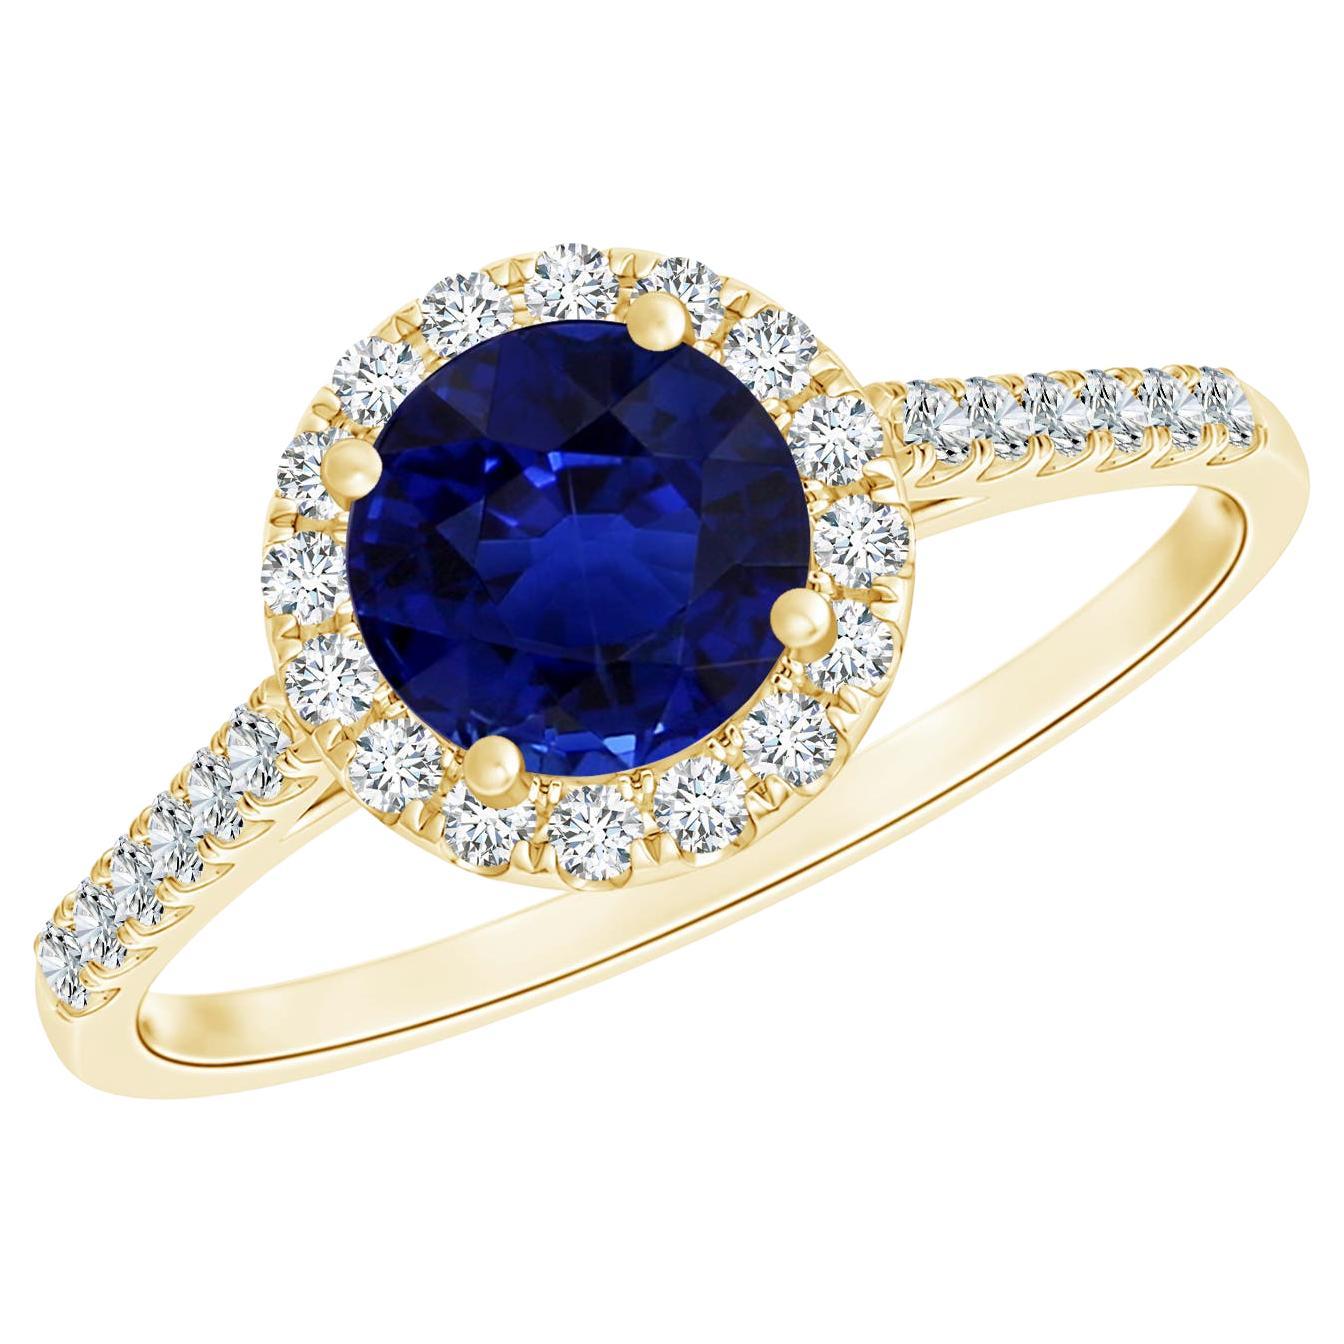 For Sale:  Angara GIA Certified Natural Sapphire & Diamond Halo Ring in Solid Yellow Gold